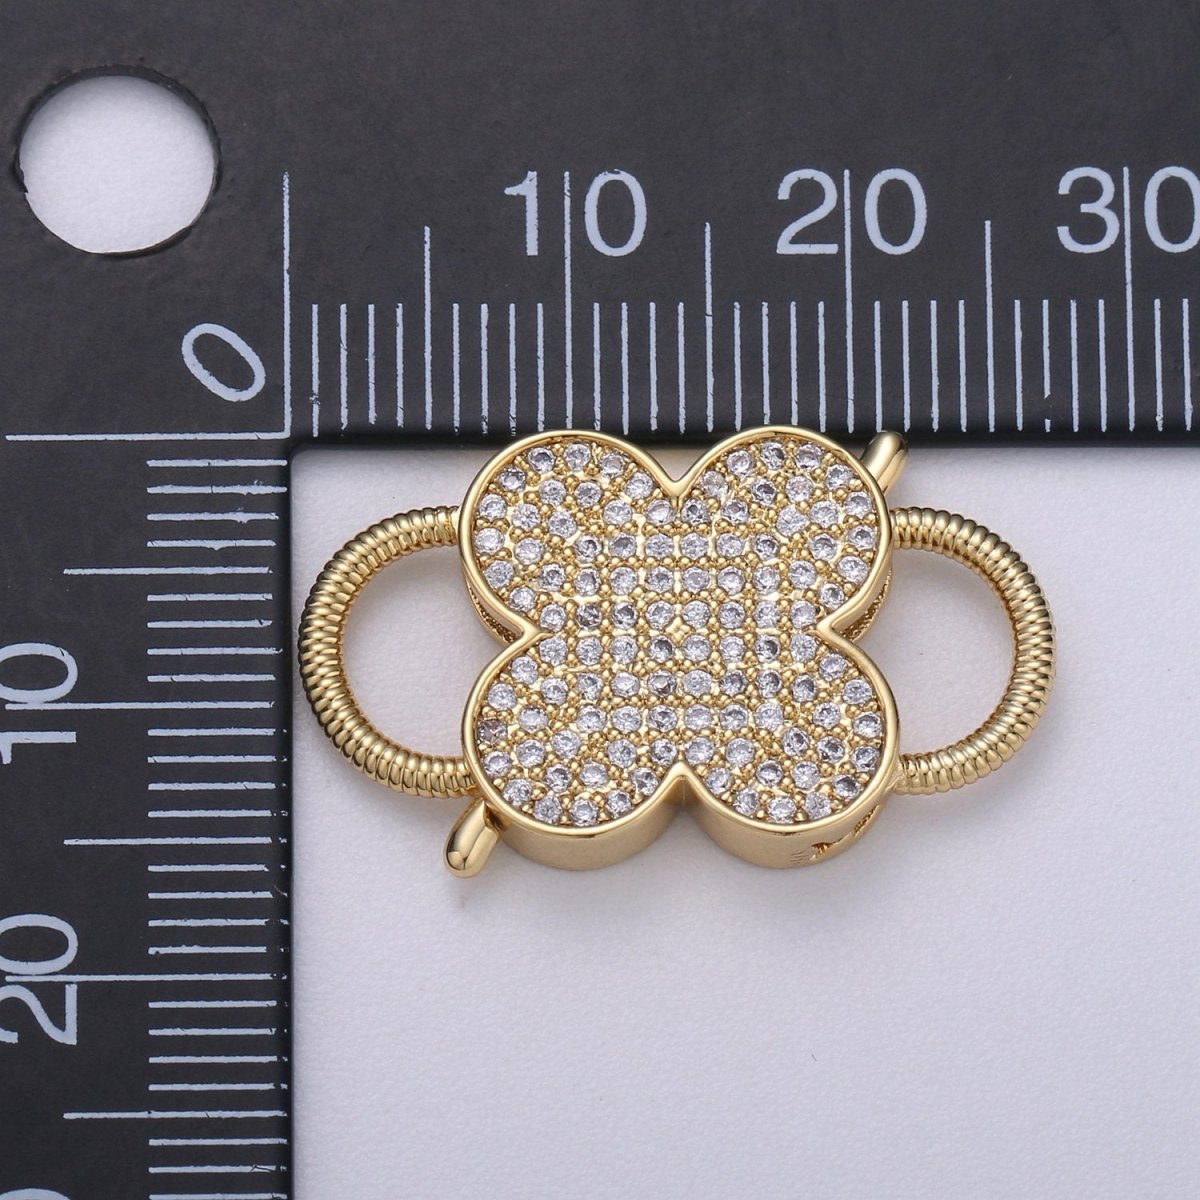 14k Gold Filled Clasp clicker Clover Clasp, 16x27mm, Flower Clover double Clicker ends, Bracelet Necklace Clicker Connector K-911 - DLUXCA